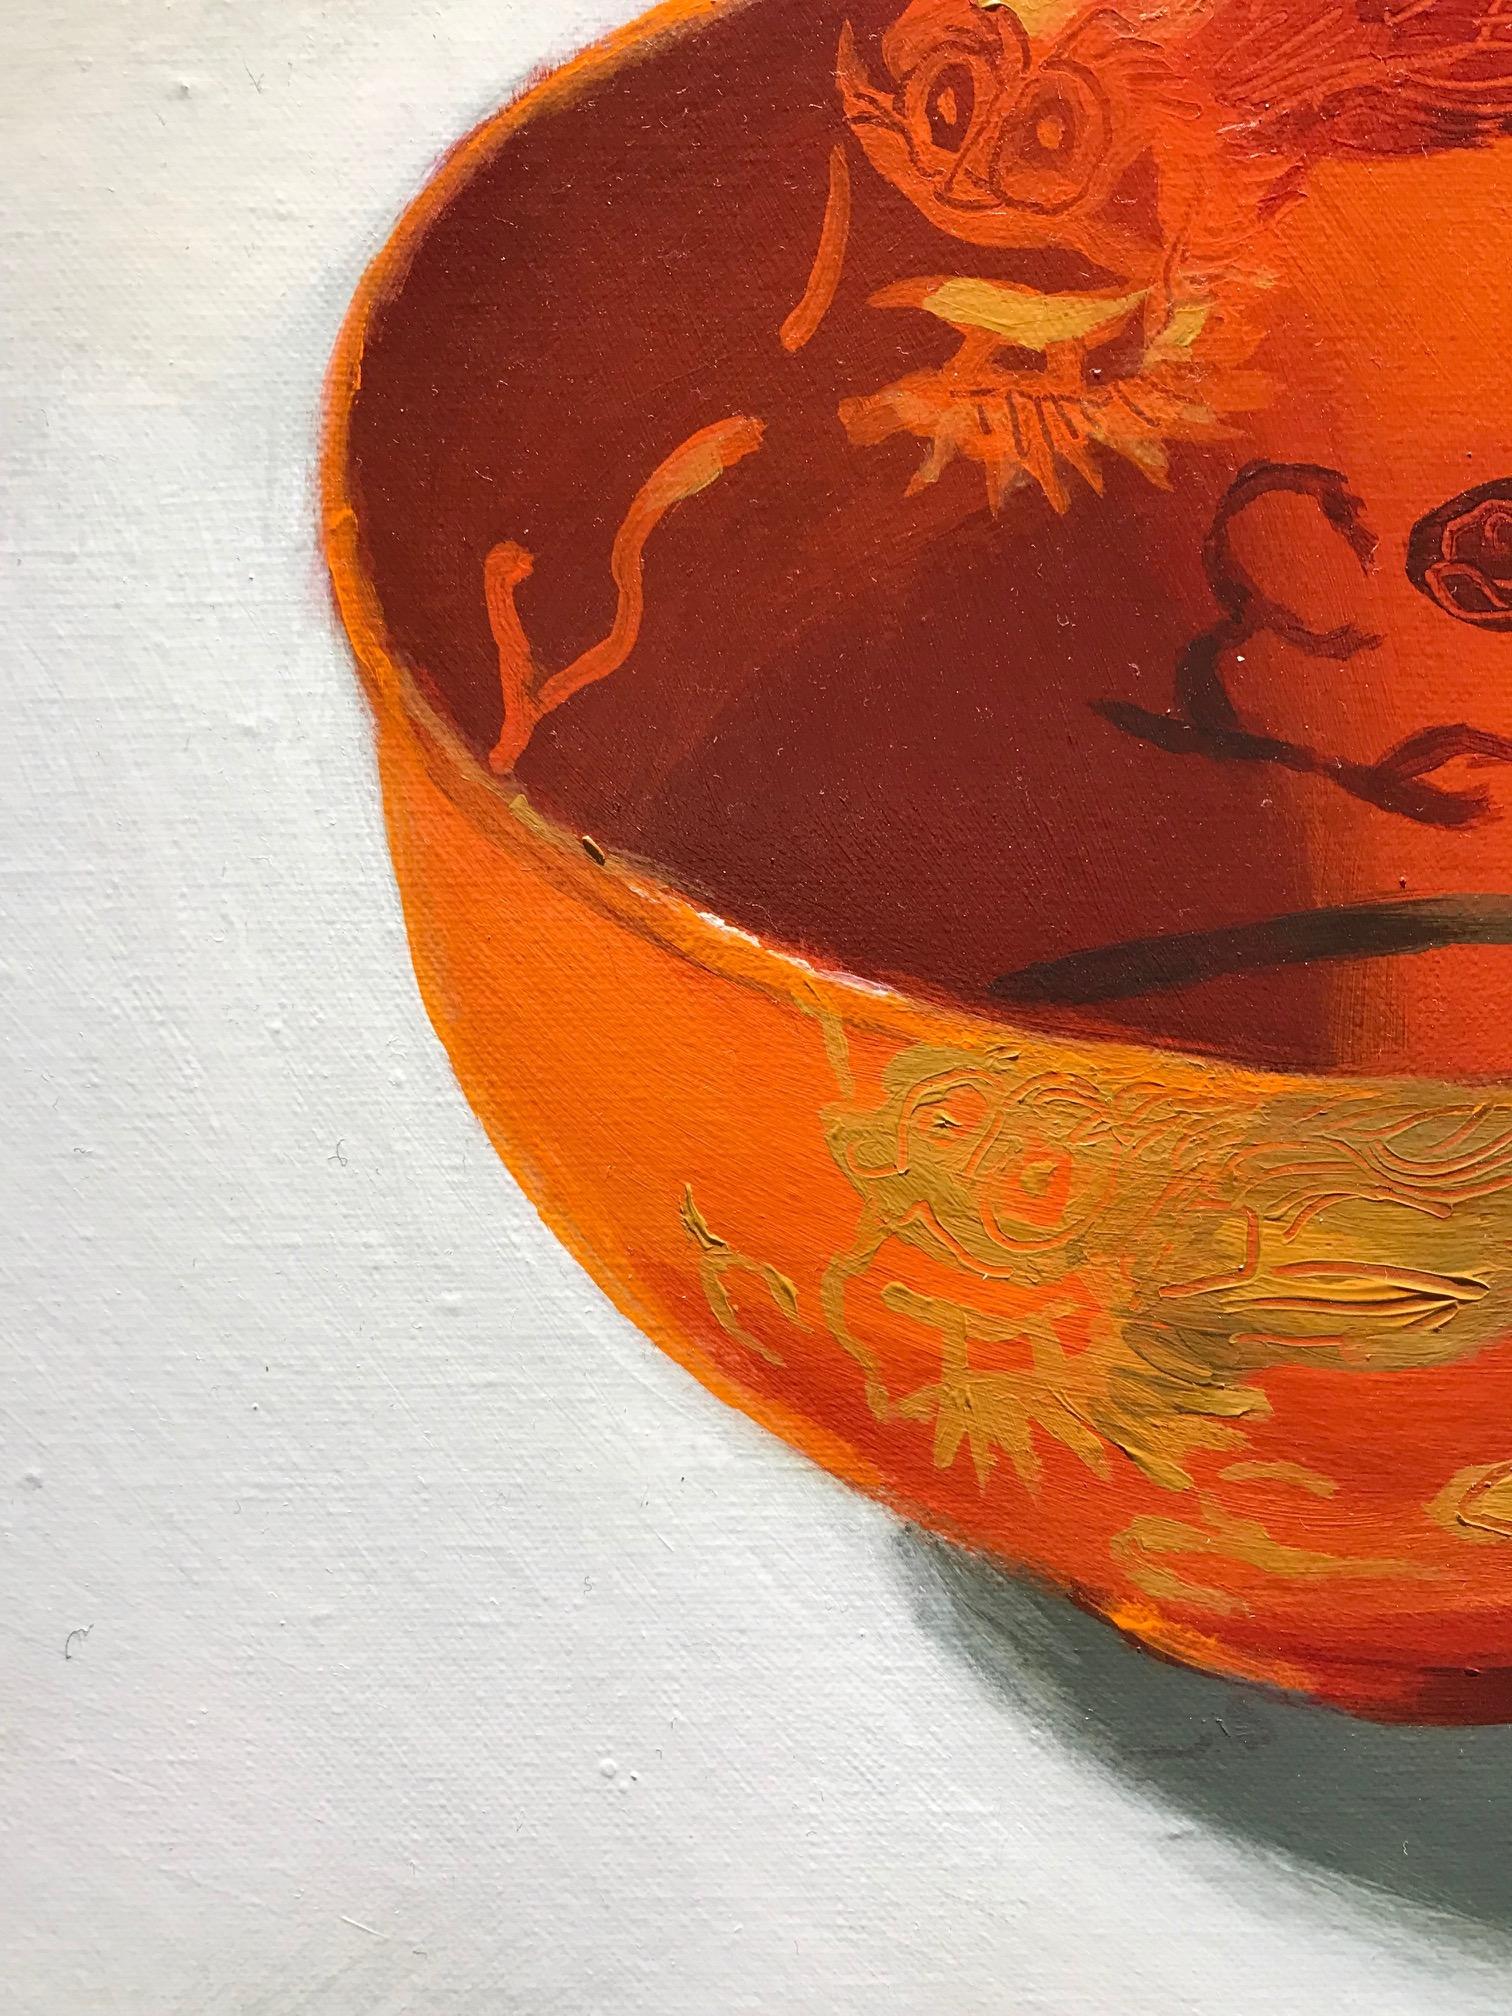 ''Orange cup'', Dutch Contemporary Dutch Still-Life with Chinese Porcelain - Painting by Sasja Wagenaar